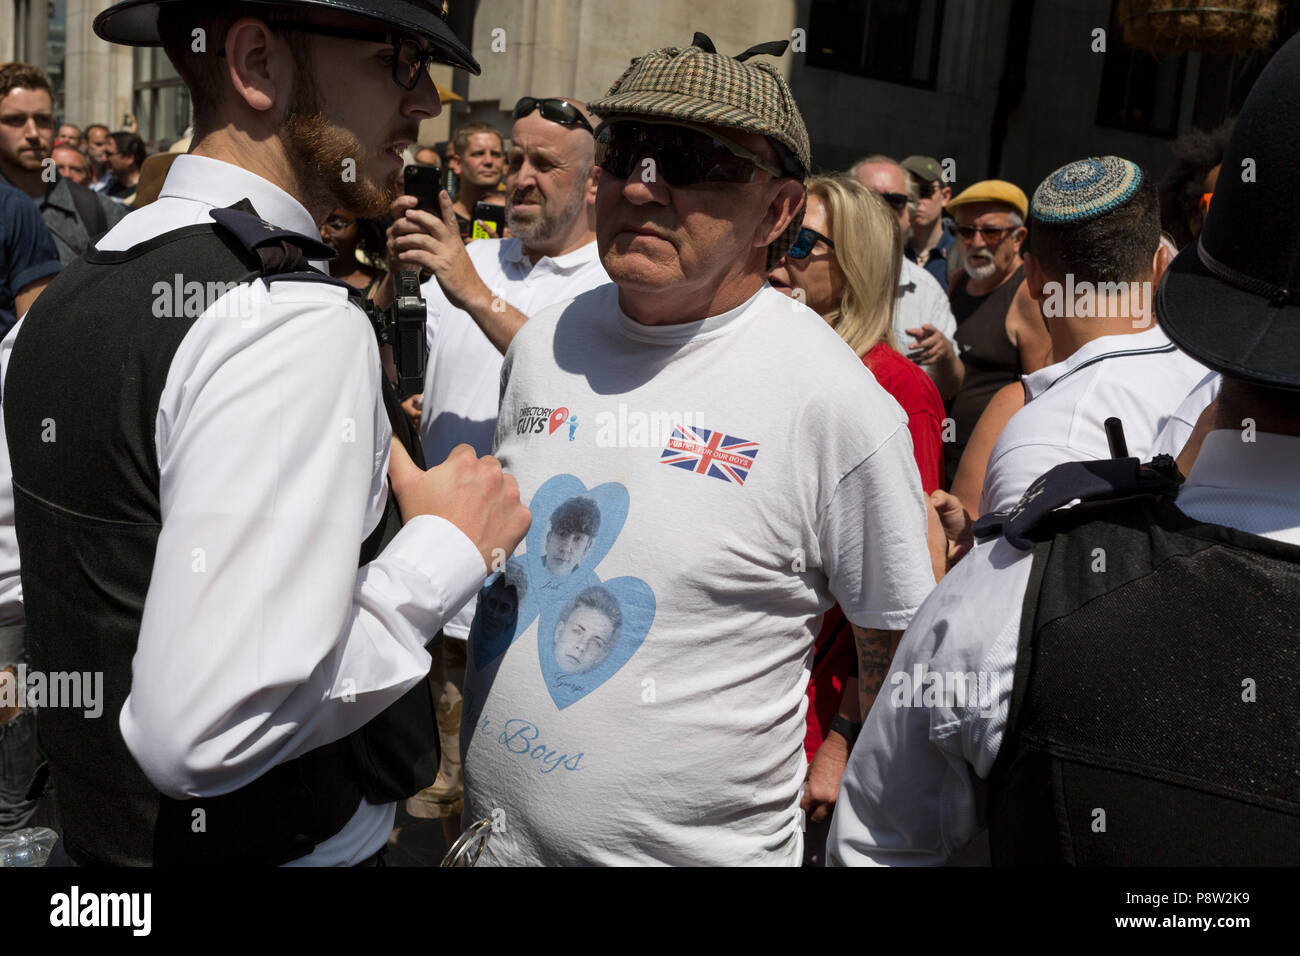 London, UK: Members of the far-right supporters of jailed English Defence Force (EDF) leader Tommy Robinson make a counter-demonstration to those against the visit of US President Donald Trump to the UK, march through central London, on 13th July 2018, in London, England. Photo by Richard Baker / Alamy Live News Stock Photo